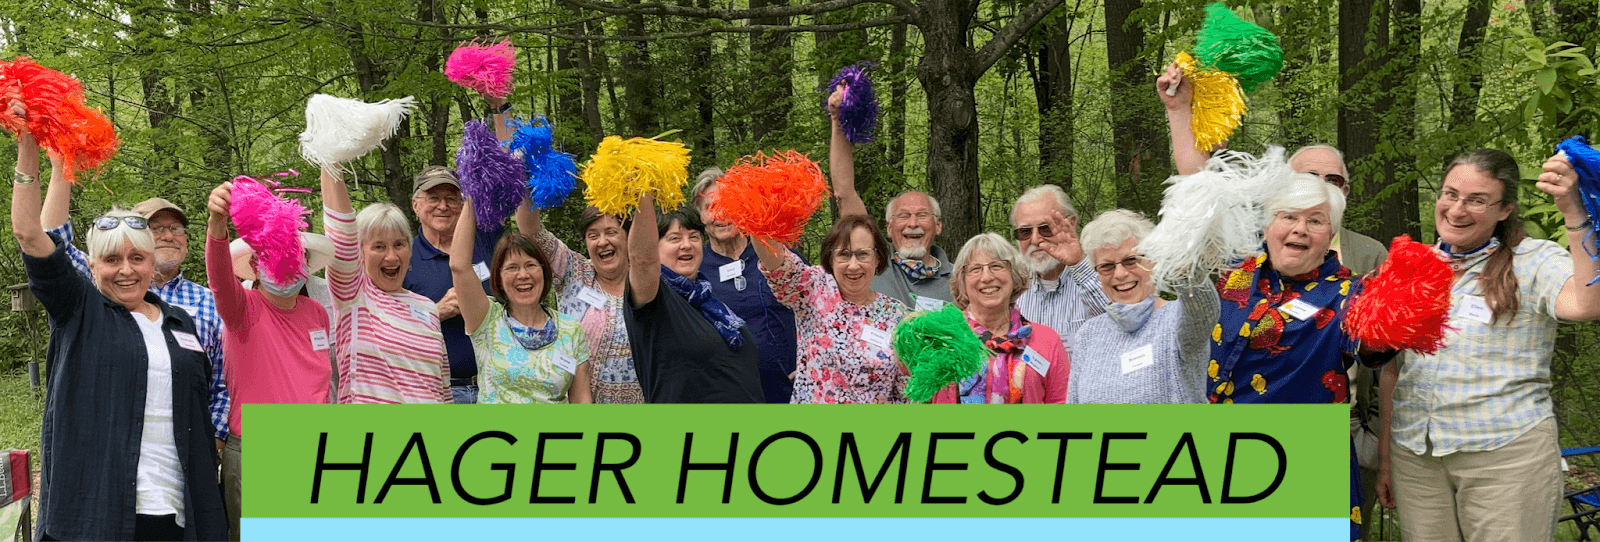 cropped Hager Homestead pompoms - - Sociocracy For All